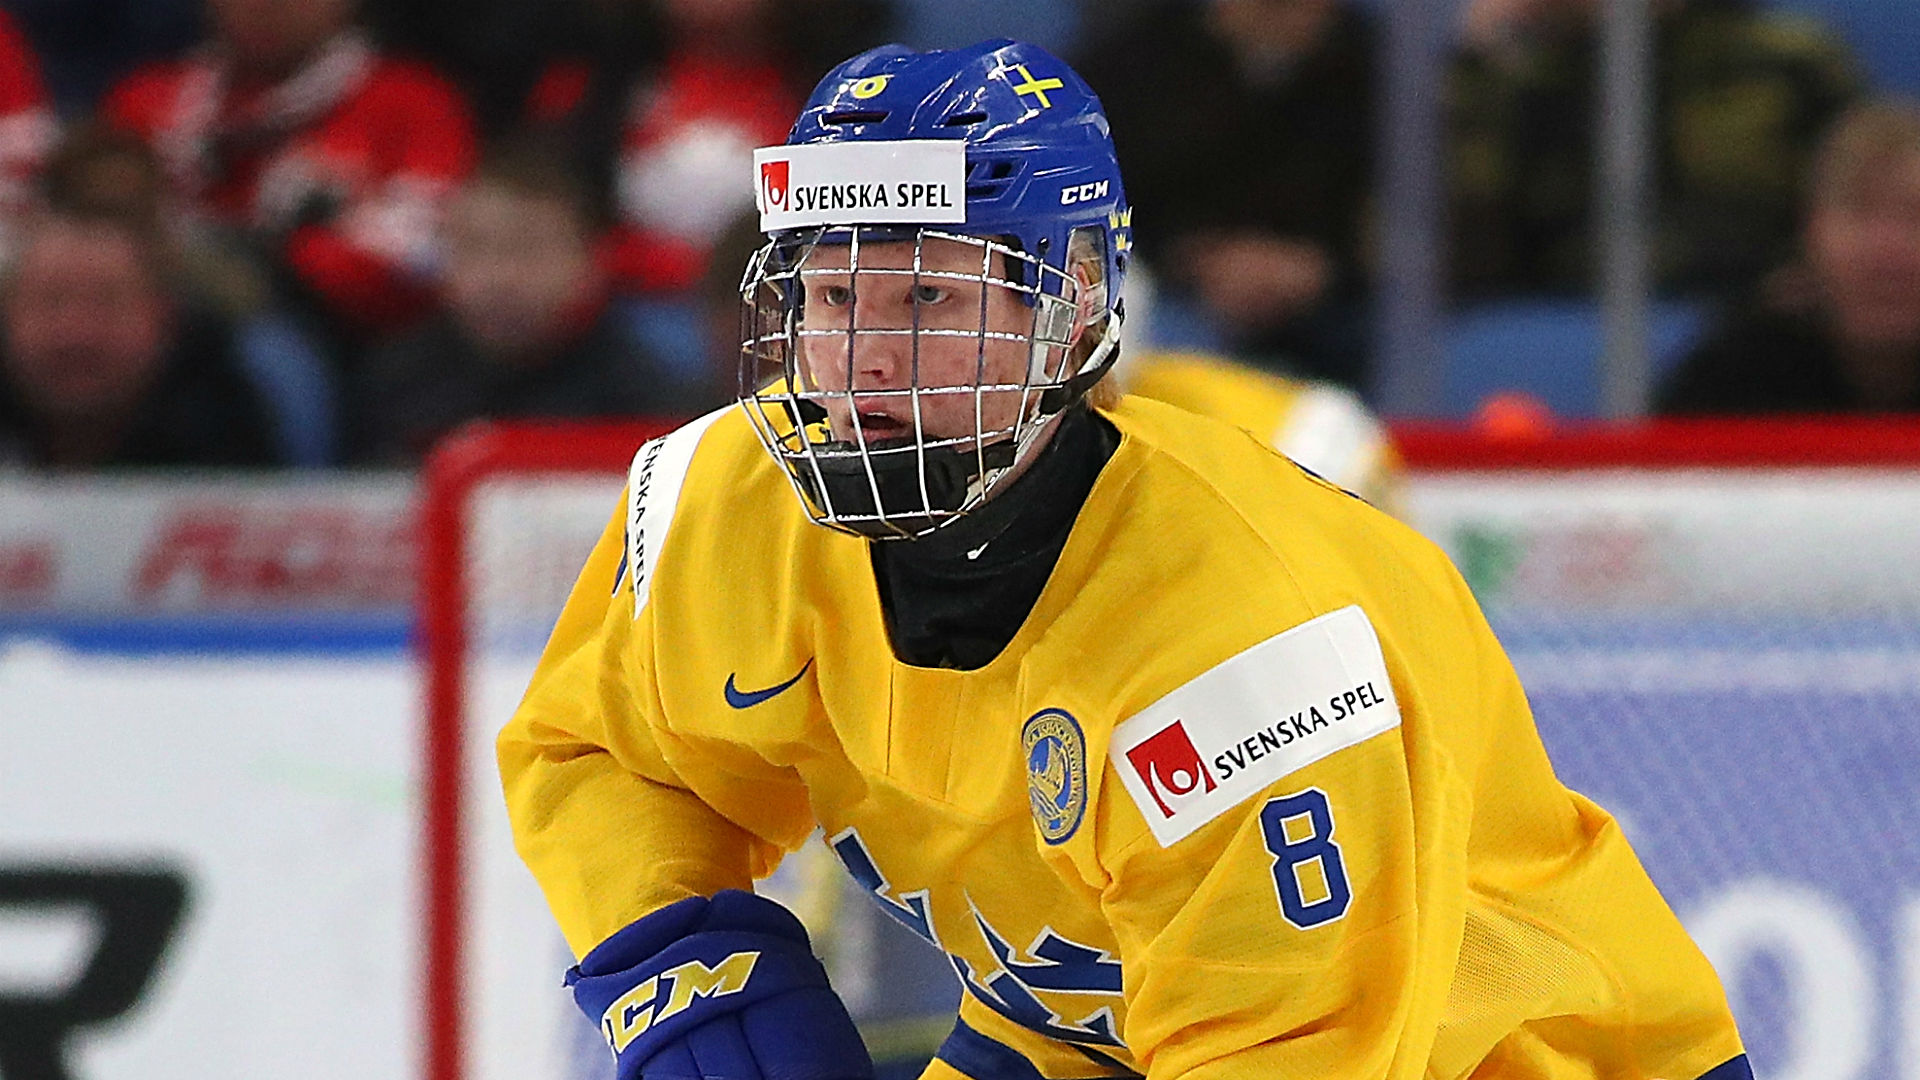 Top Nhl Draft Prospect Rasmus Dahlin Among Players Coaches Suspended By Iihf Nhl Sporting News